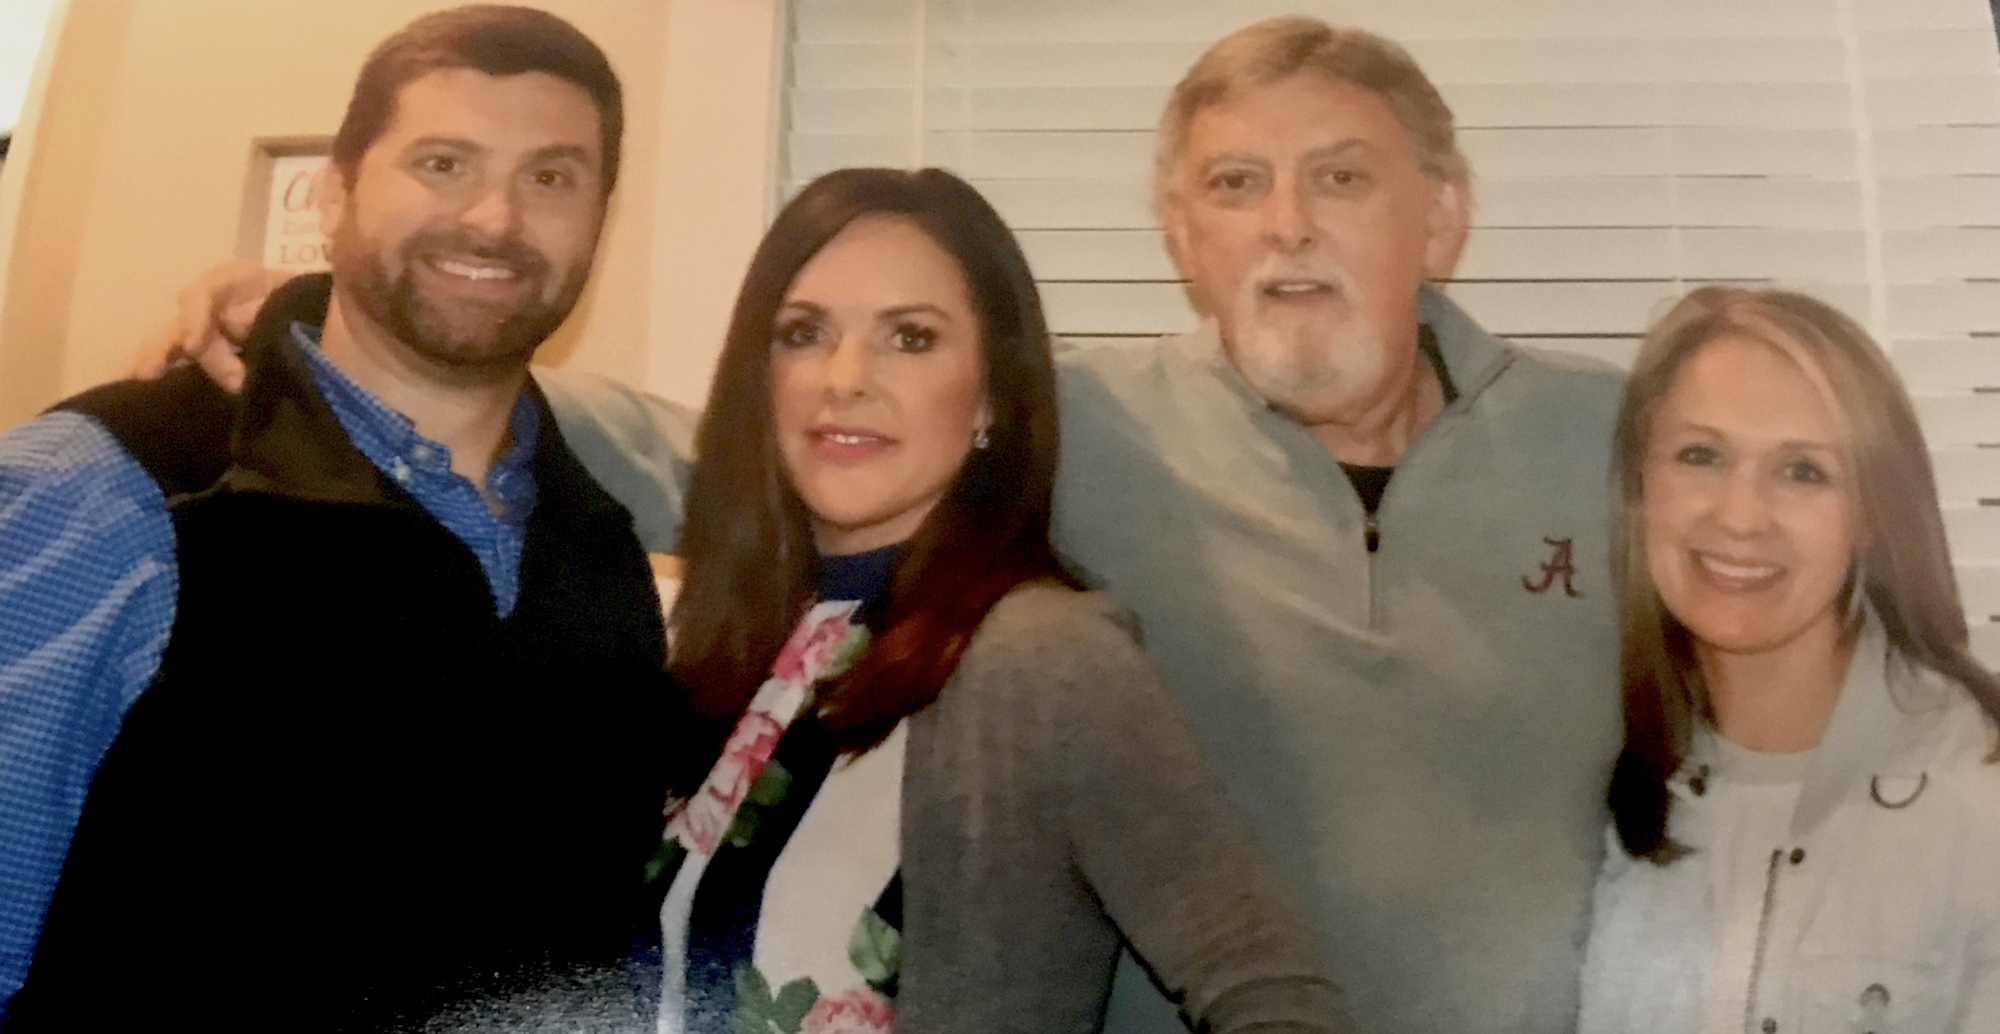 April Ciarlone, second from left, has even more to love: her brother, Chase Oldham, left; her father, Barry Oldham; and her sister, Alicia Neely.